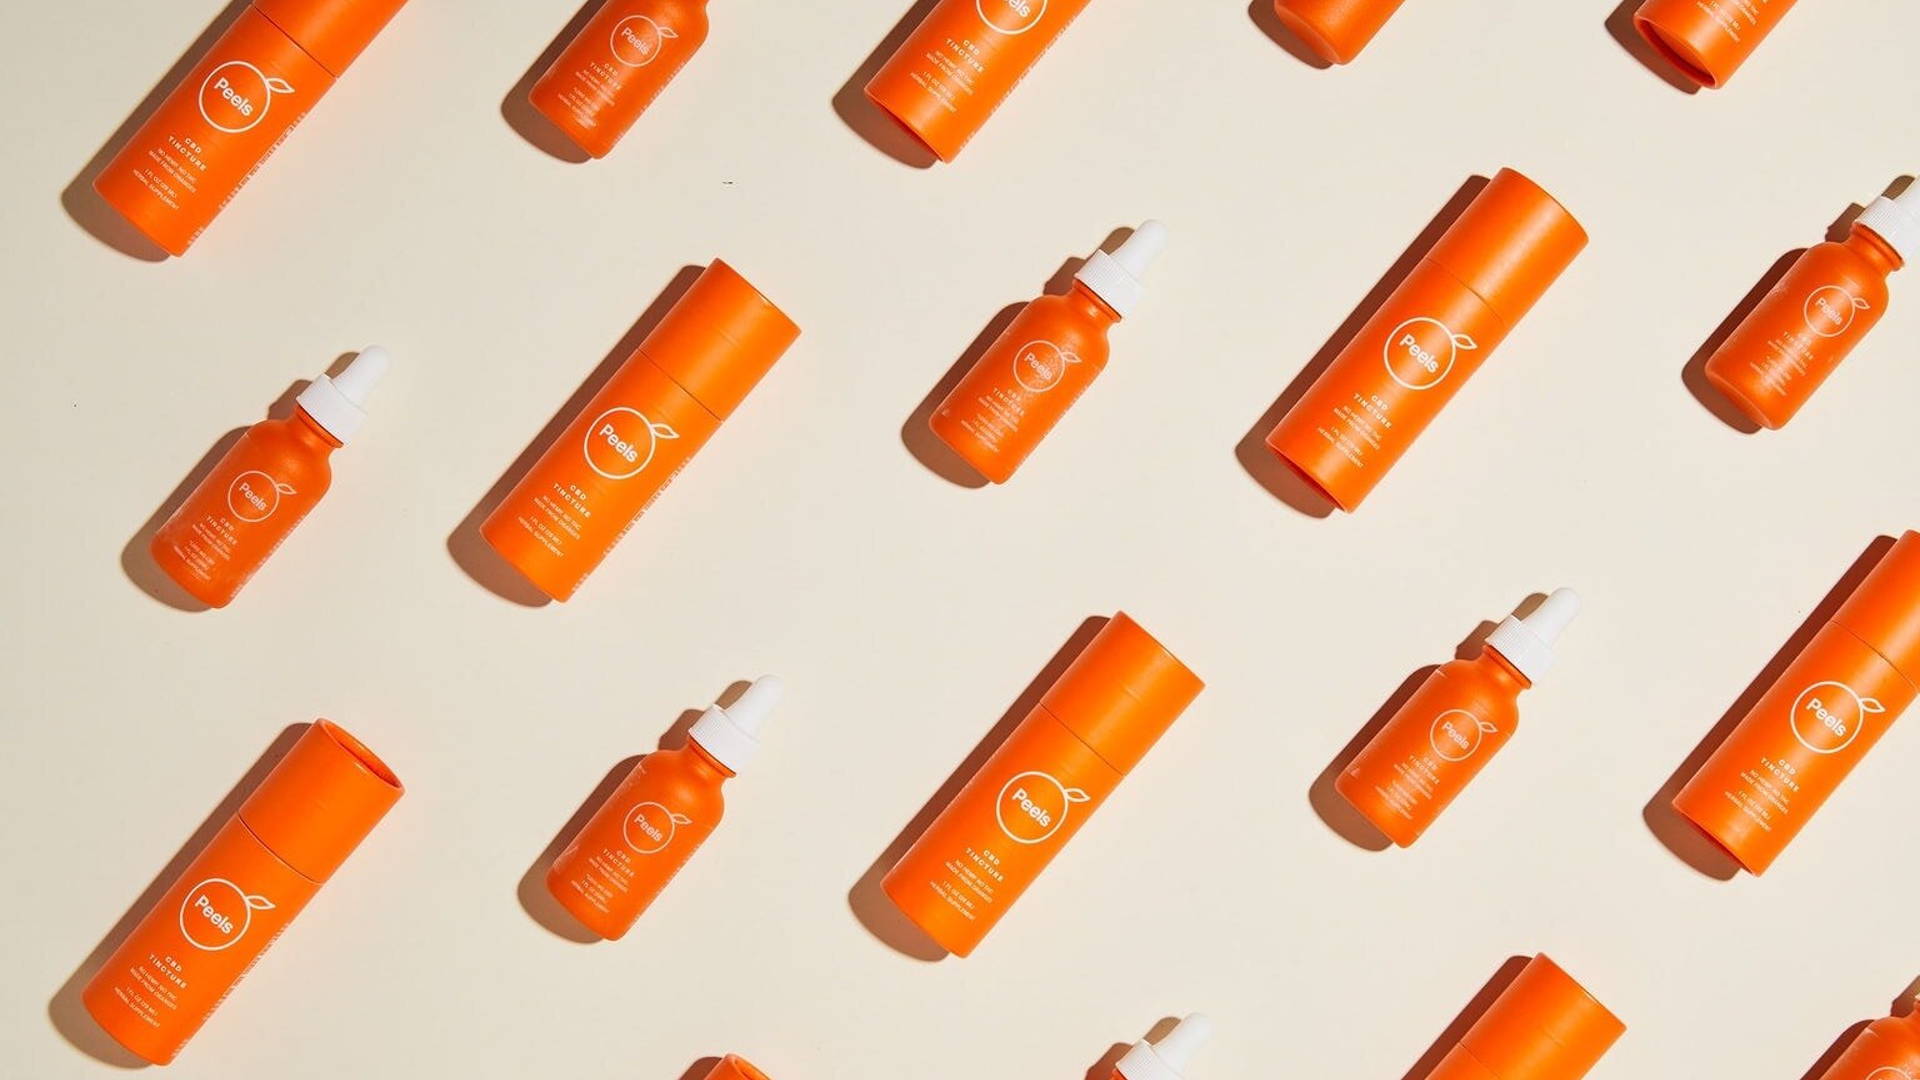 Featured image for Peels' Orange Packaging Is Straight To The Point